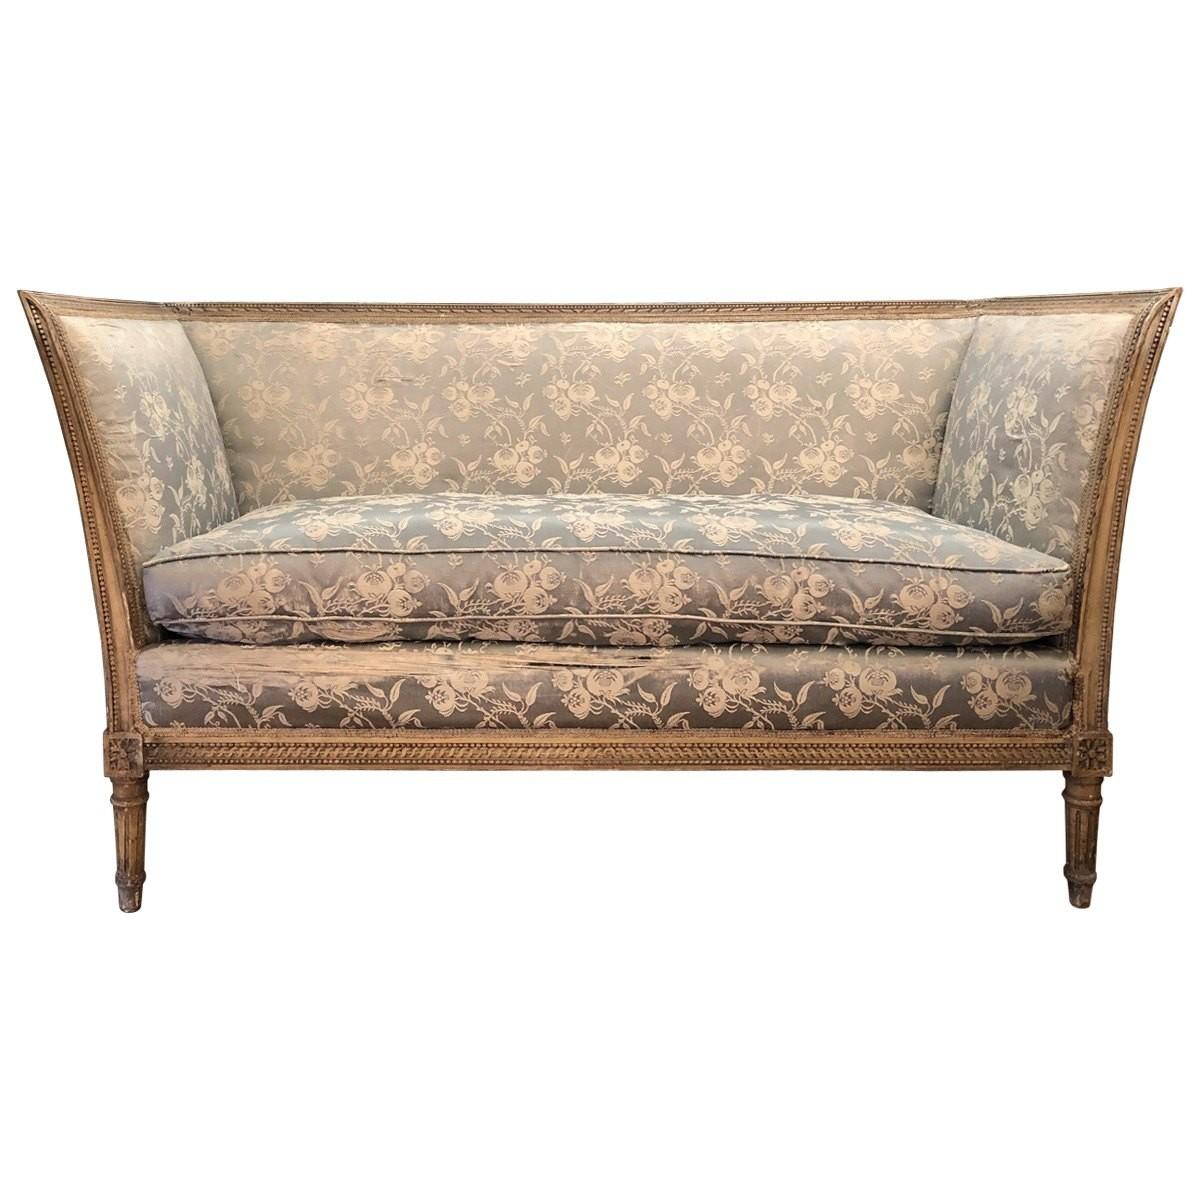 These carved and painted settees exude the decadent and luxurious grace of the Louis XVI era. These carved and painted Louis XVI settees come with a low back. The settees consist of loose and zippered down-filled seats in powder blue and cream silk